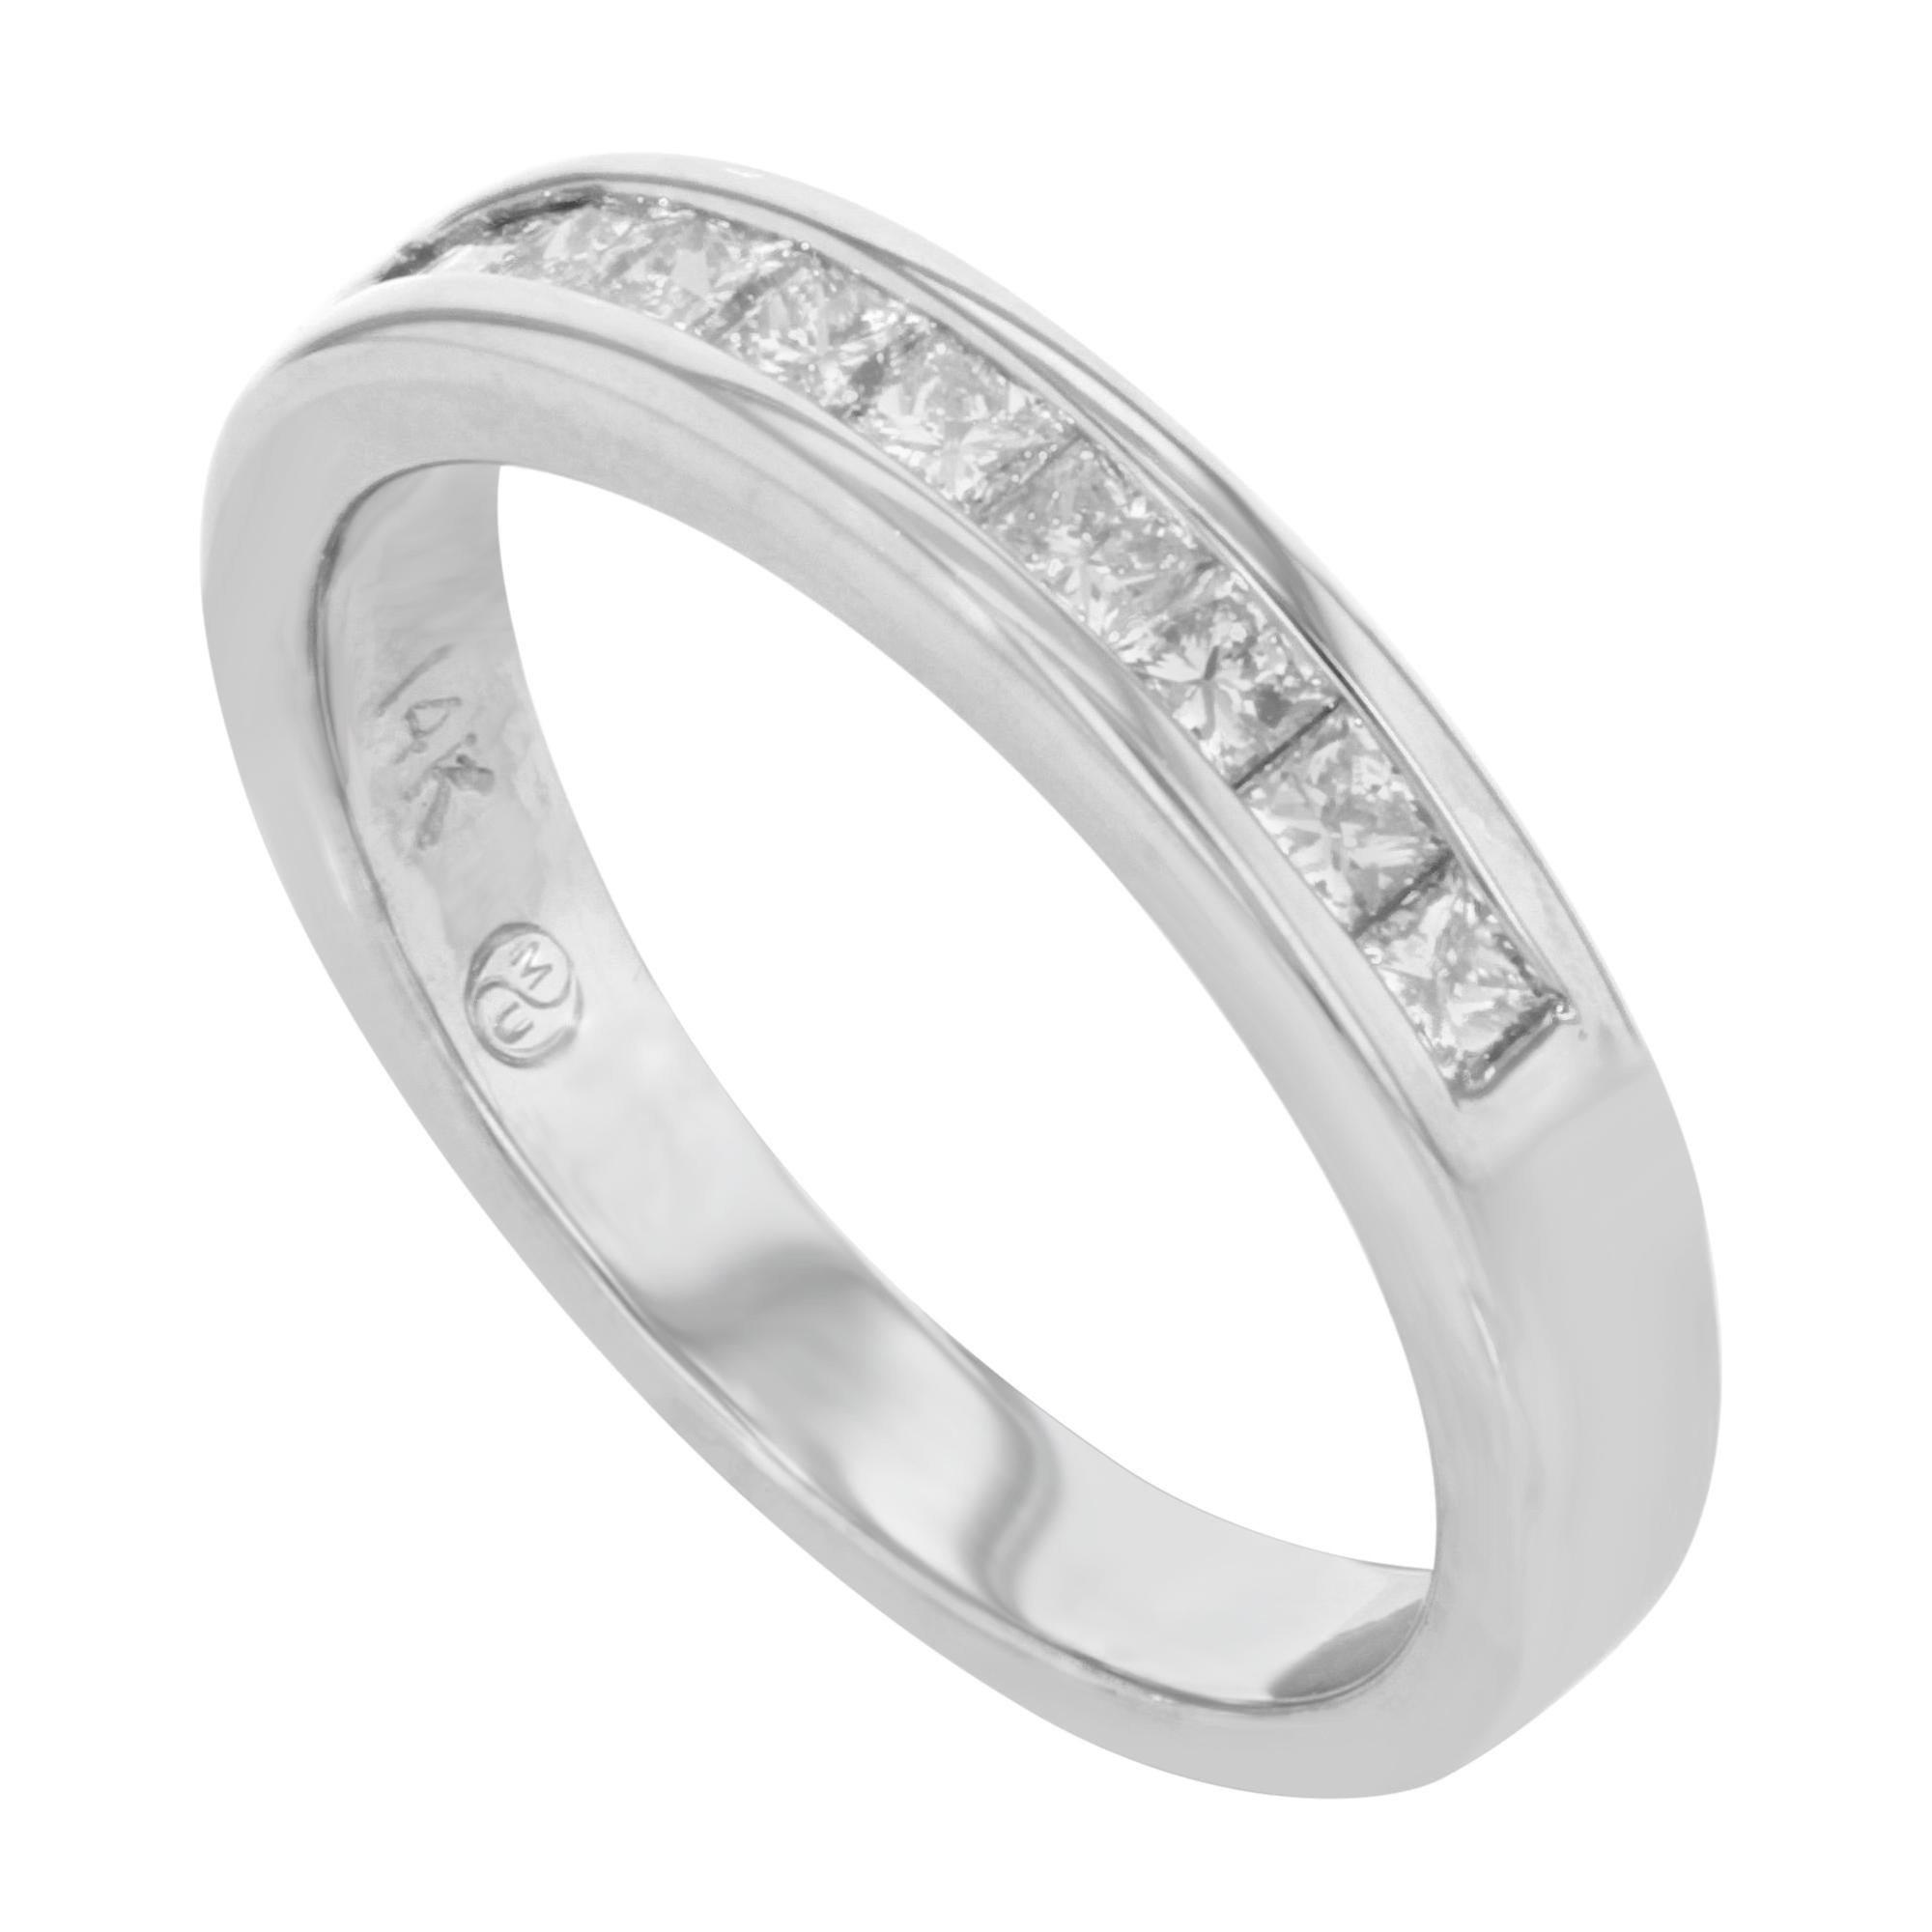 Stunning diamond wedding band with princess cut diamonds. Total of 10 stones weighing 0.75 cttw. Crafted in high polished 14K white gold. This eternity band features channel set design that can be worn as a beautiful wedding band, or simple princess